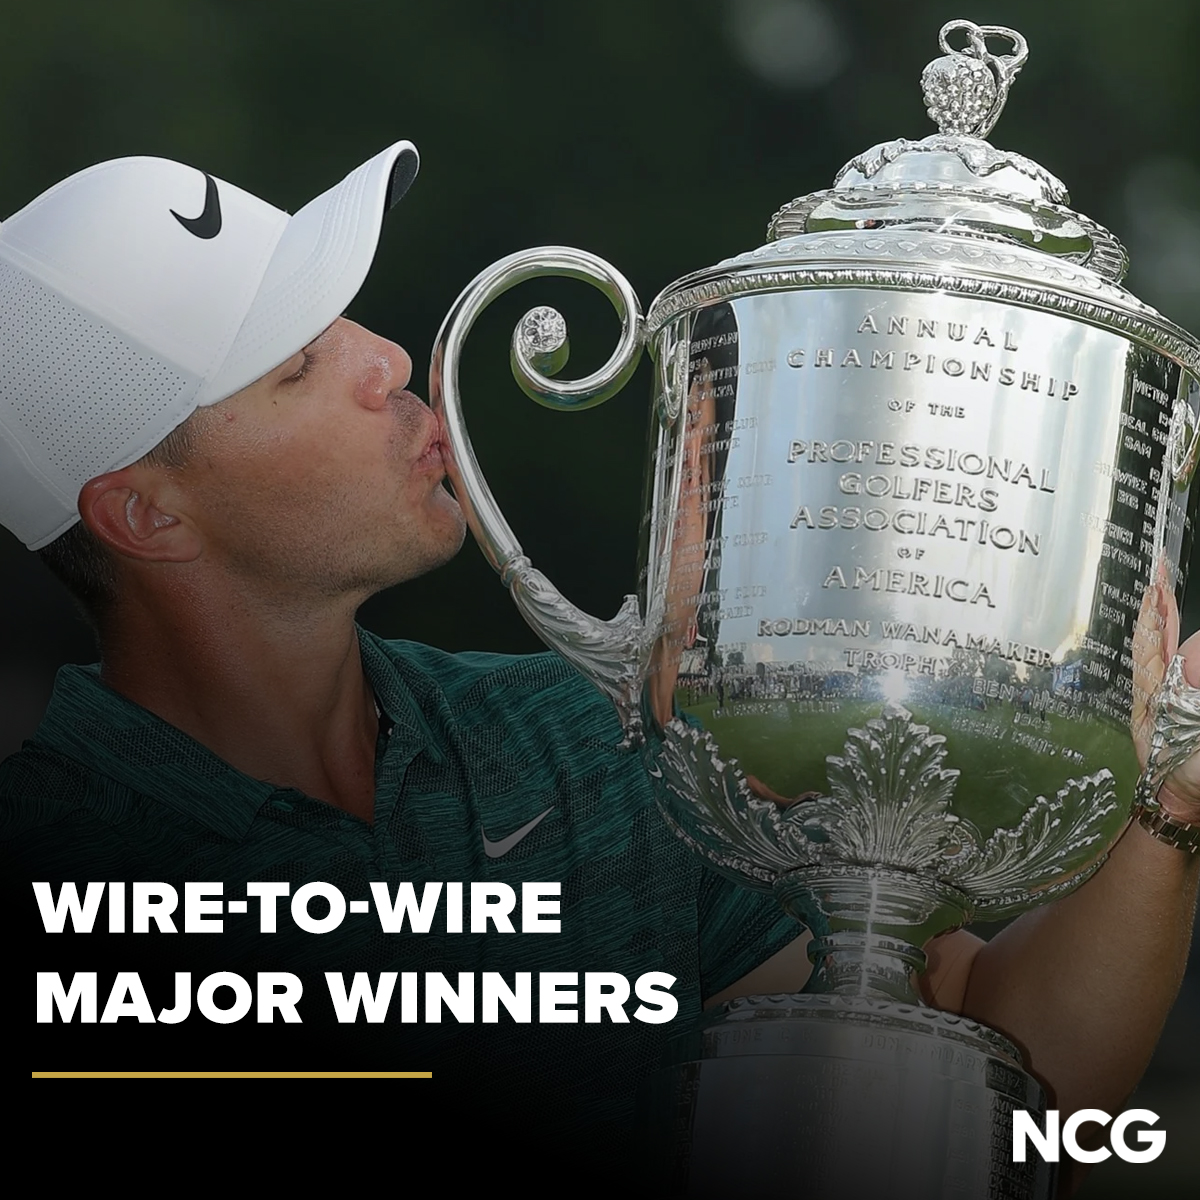 Xander Schauffele added his name to an illustrious list of players to win a major championship by going wire-to-wire 🏆 🔗 ow.ly/2cLw50RMIGE